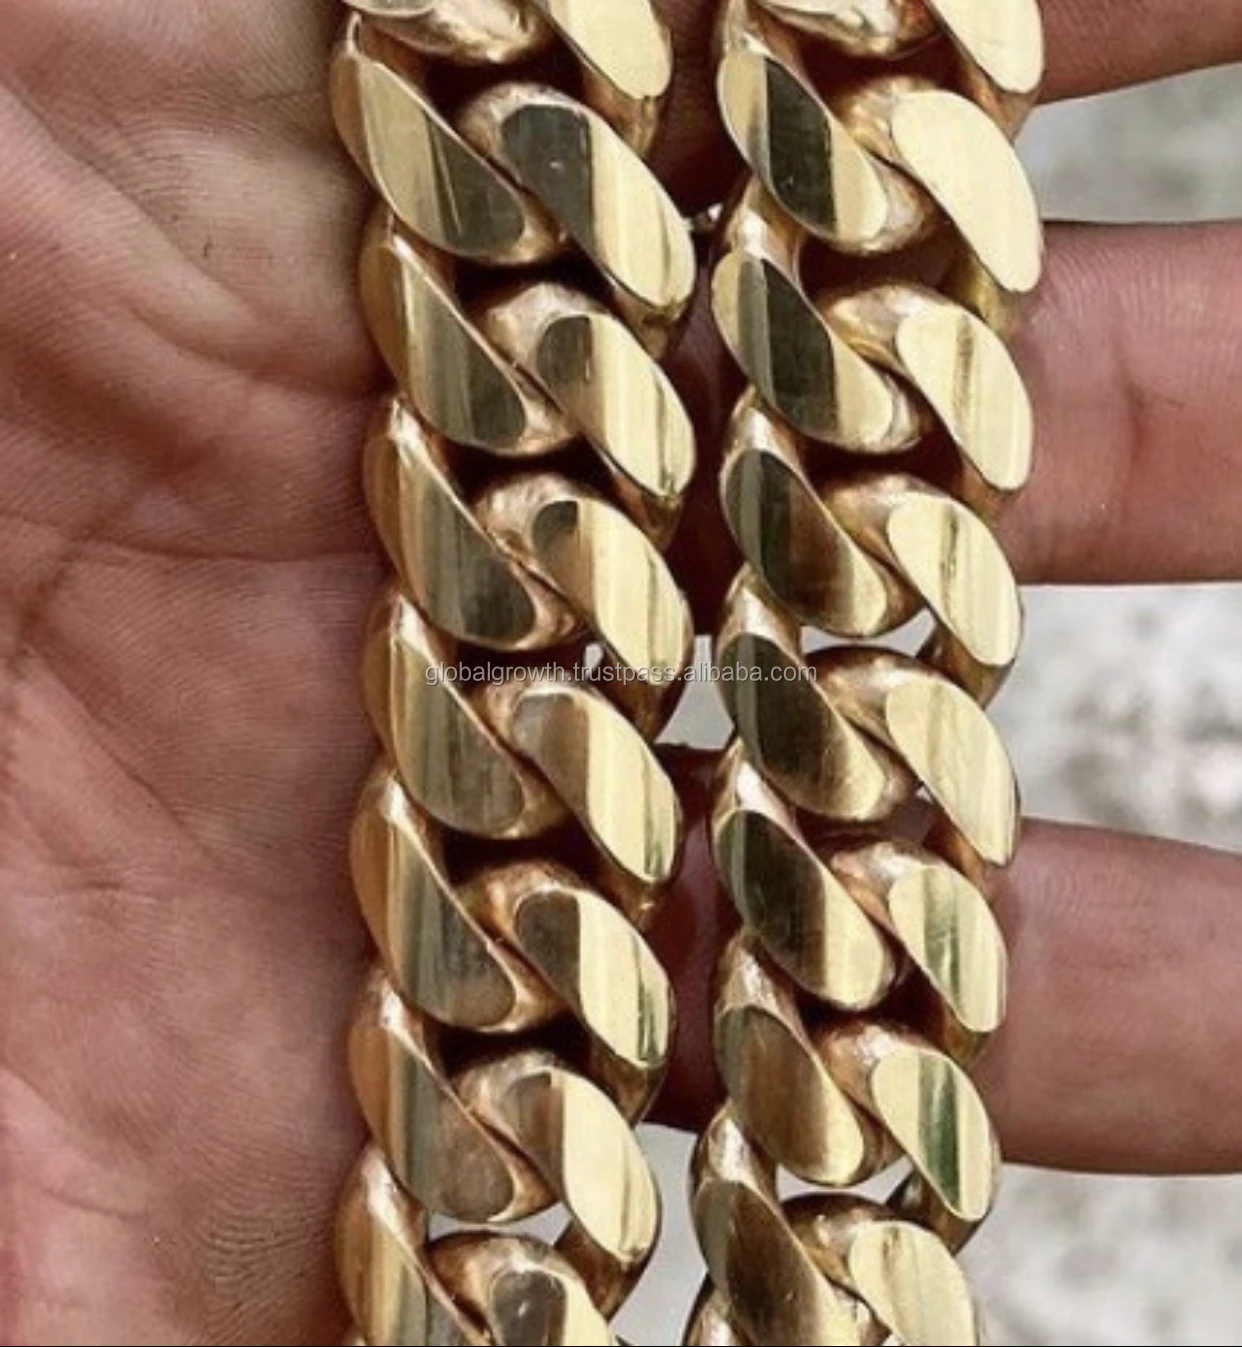 10k Real Gold Miami Cuban Link Chain Bracelets (200 to 300 grams, 8mm to 20mm) Made in USA